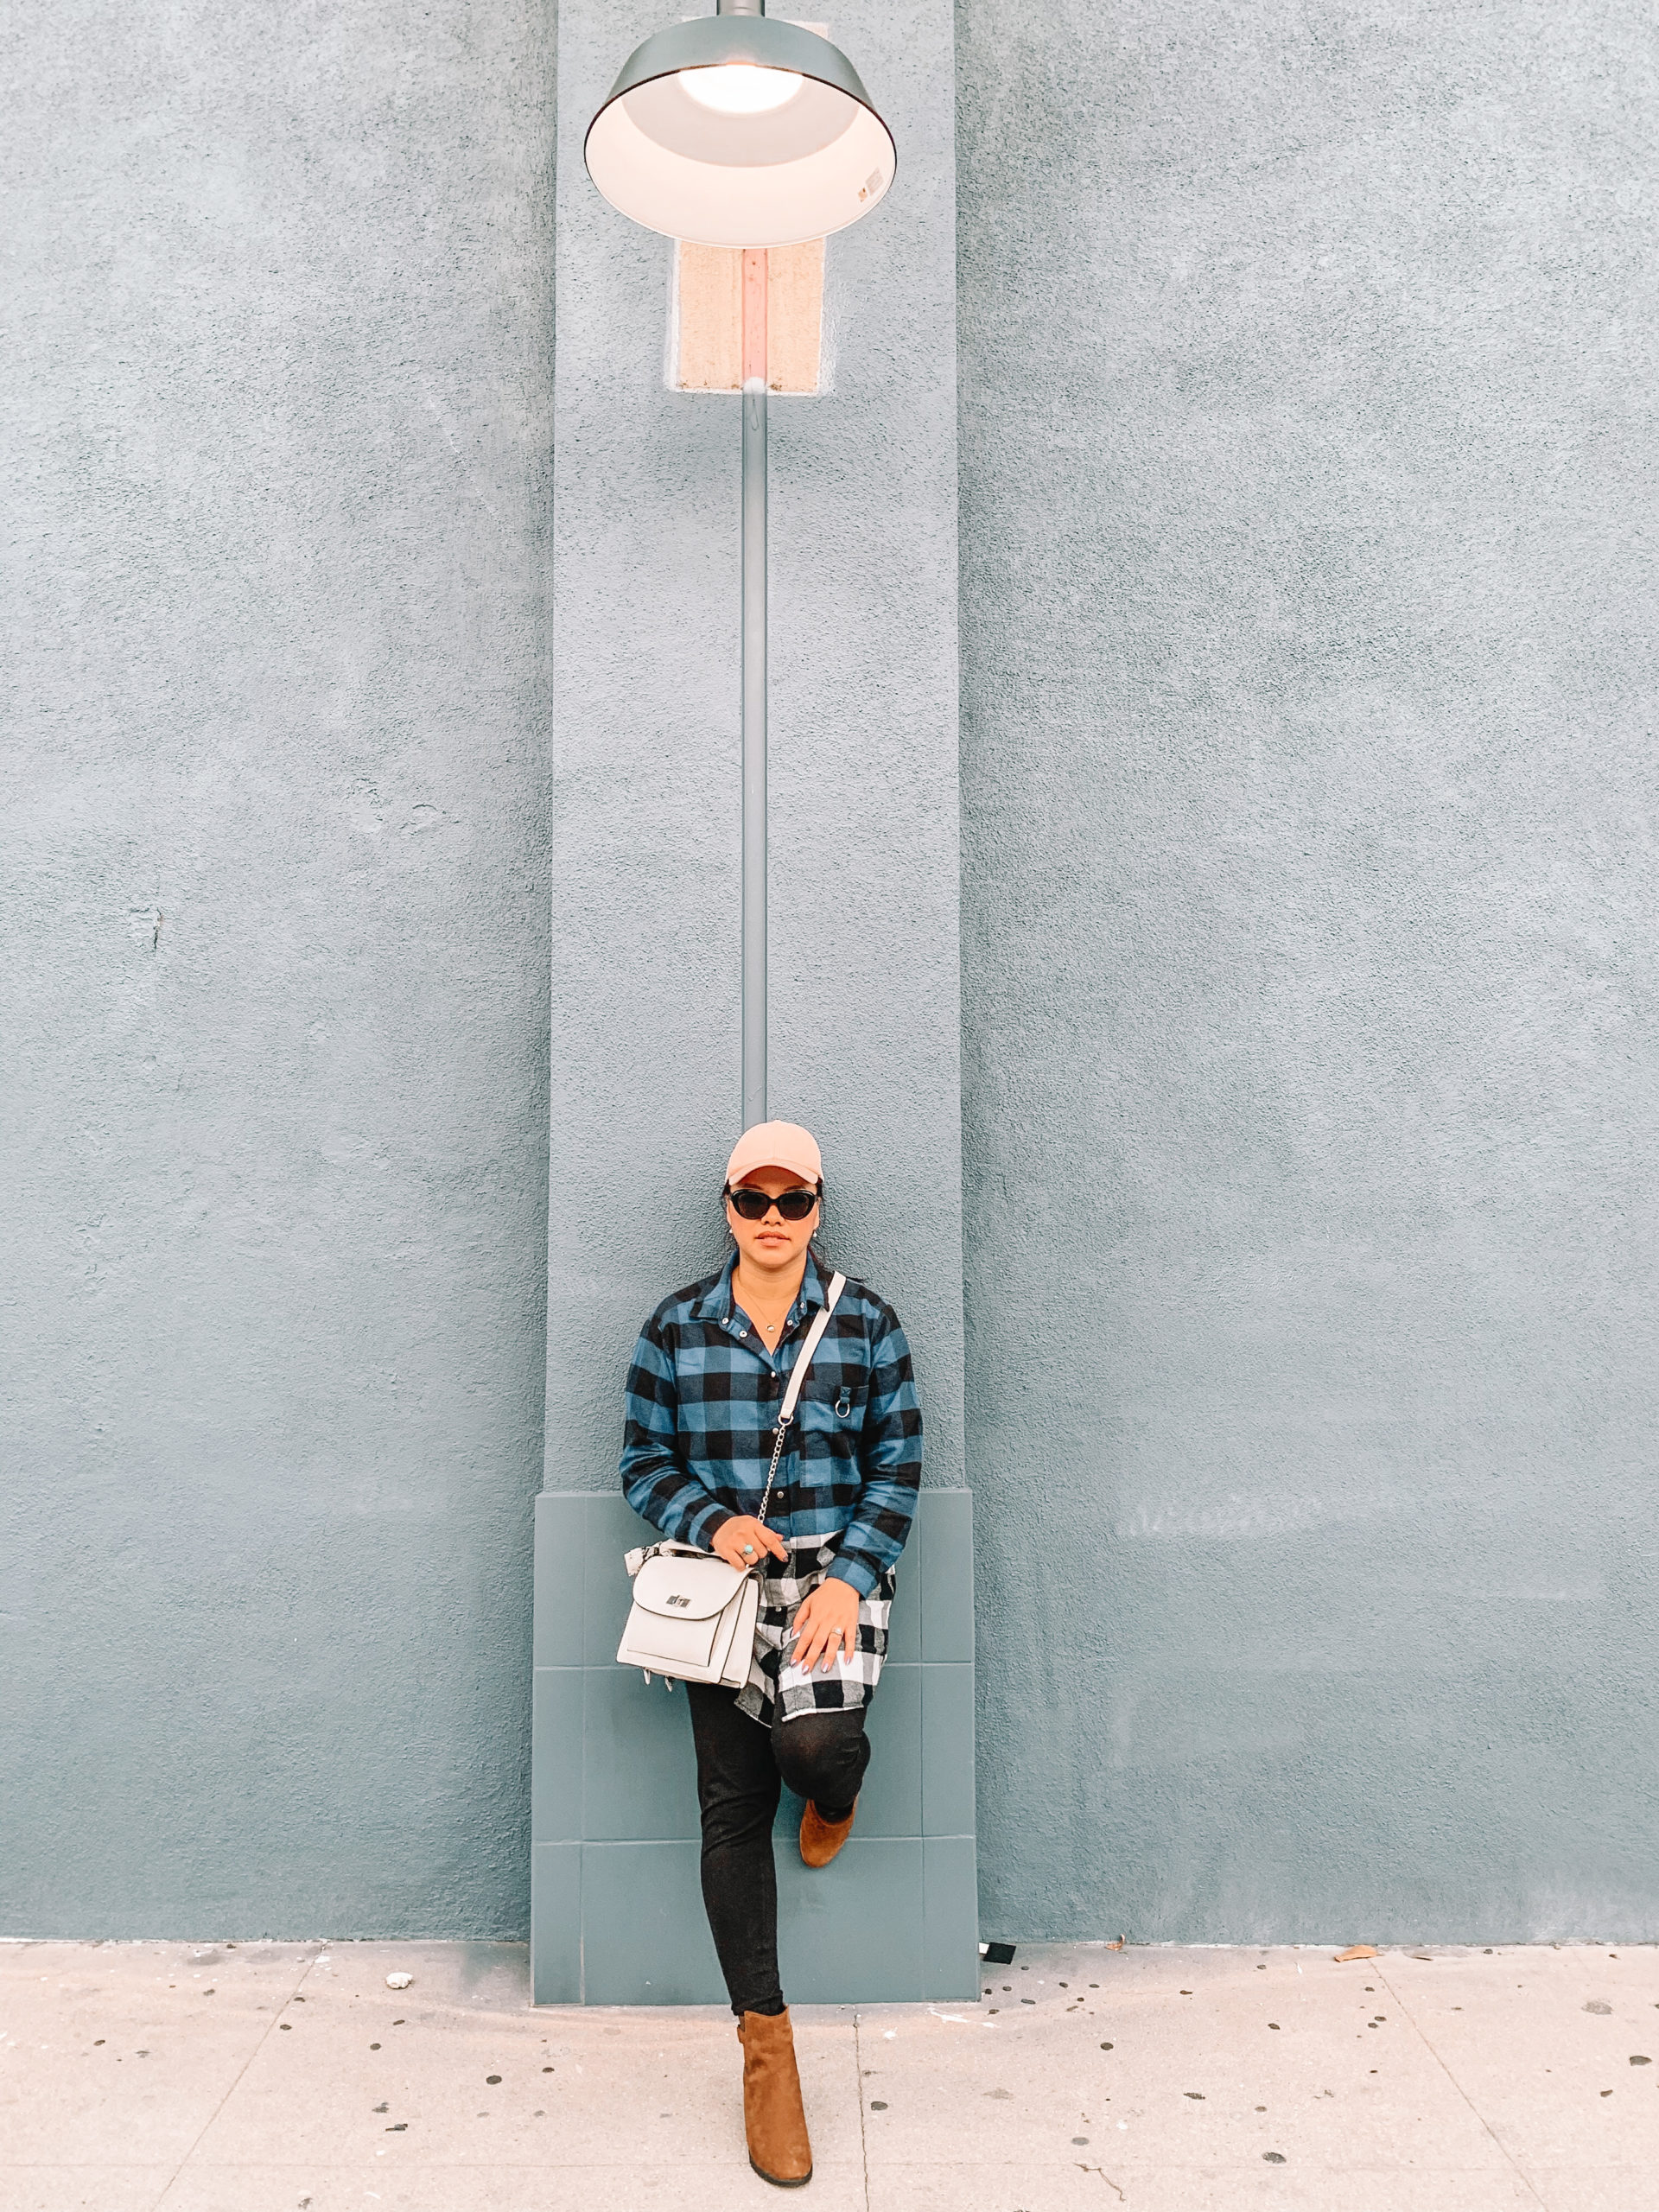 pslilyboutique-on-instagram-blue-wall-white-steve-madden-bag-black-leggings-brown-ugg-boots-winter-2020-outif-ideas-streetstyle-editorial-photography-ugg-brown-wedge-booties-boots-BTS-style-fashion-IMG_2407